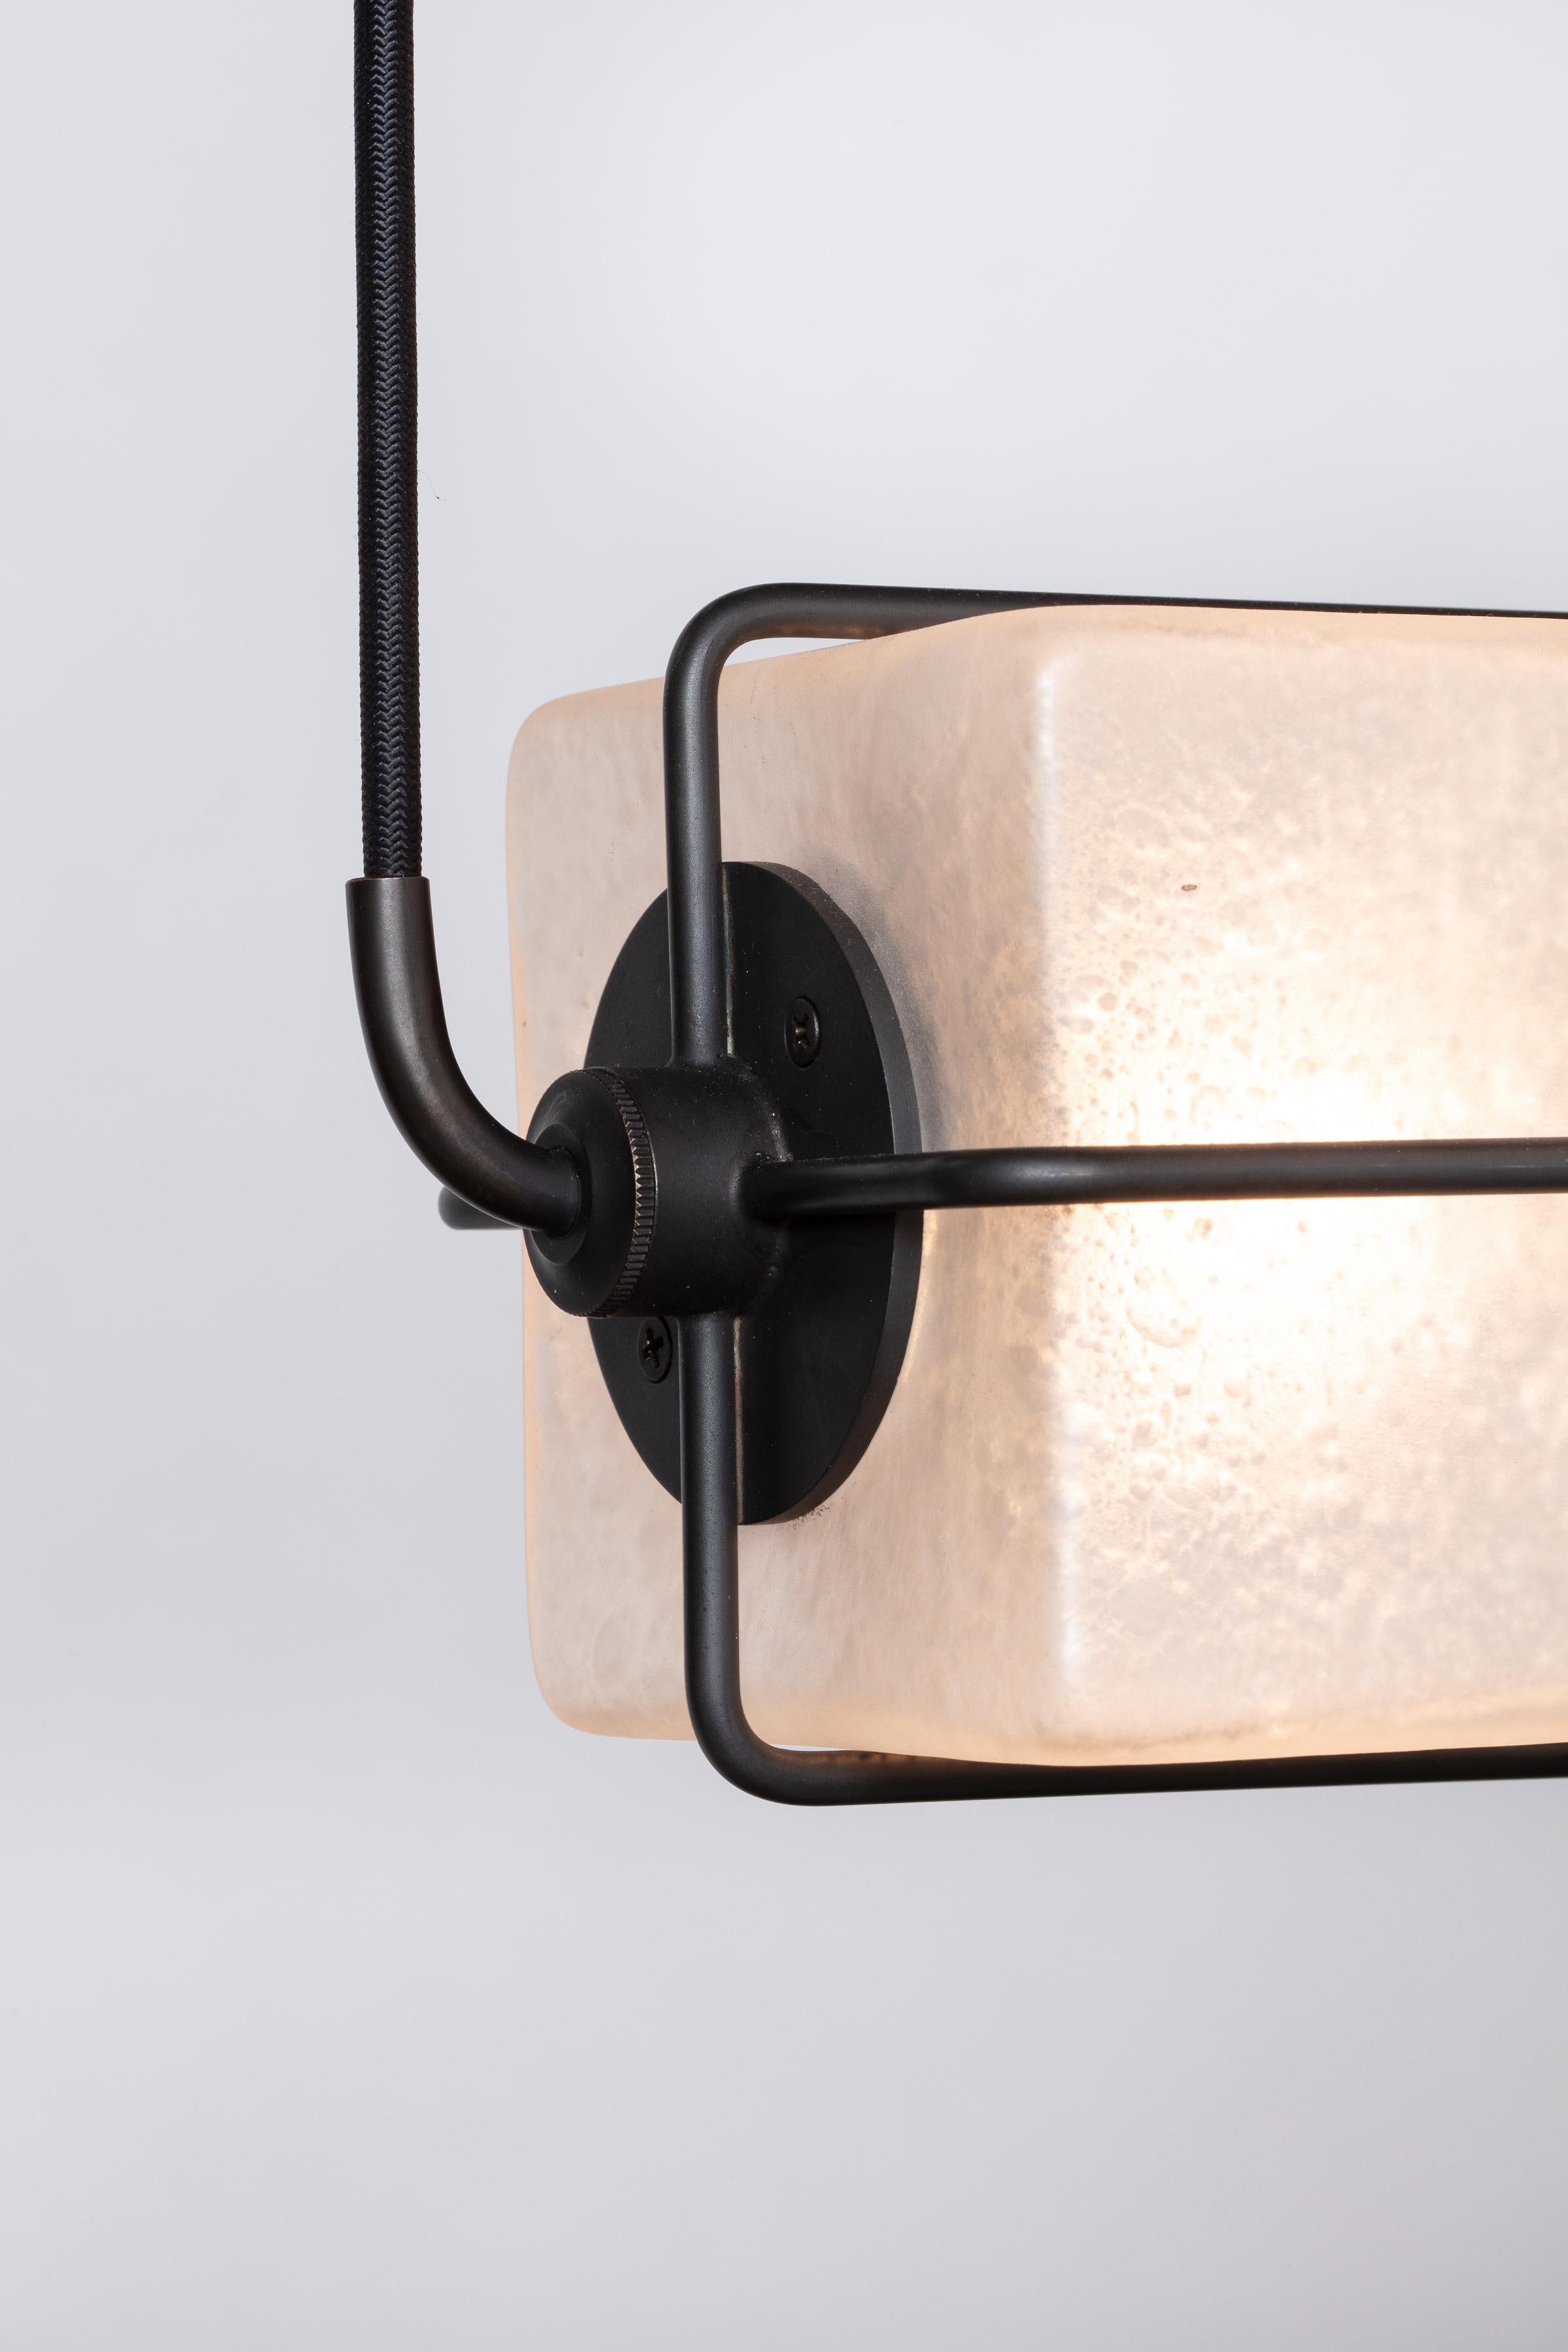 The Alice collection is inspired by Brutalist modular architecture. The textured hand blown glass cubes are sandblasted to create a soft glow and stacked together to diffuse light in different intensities. The frame is made of solid brass, finished